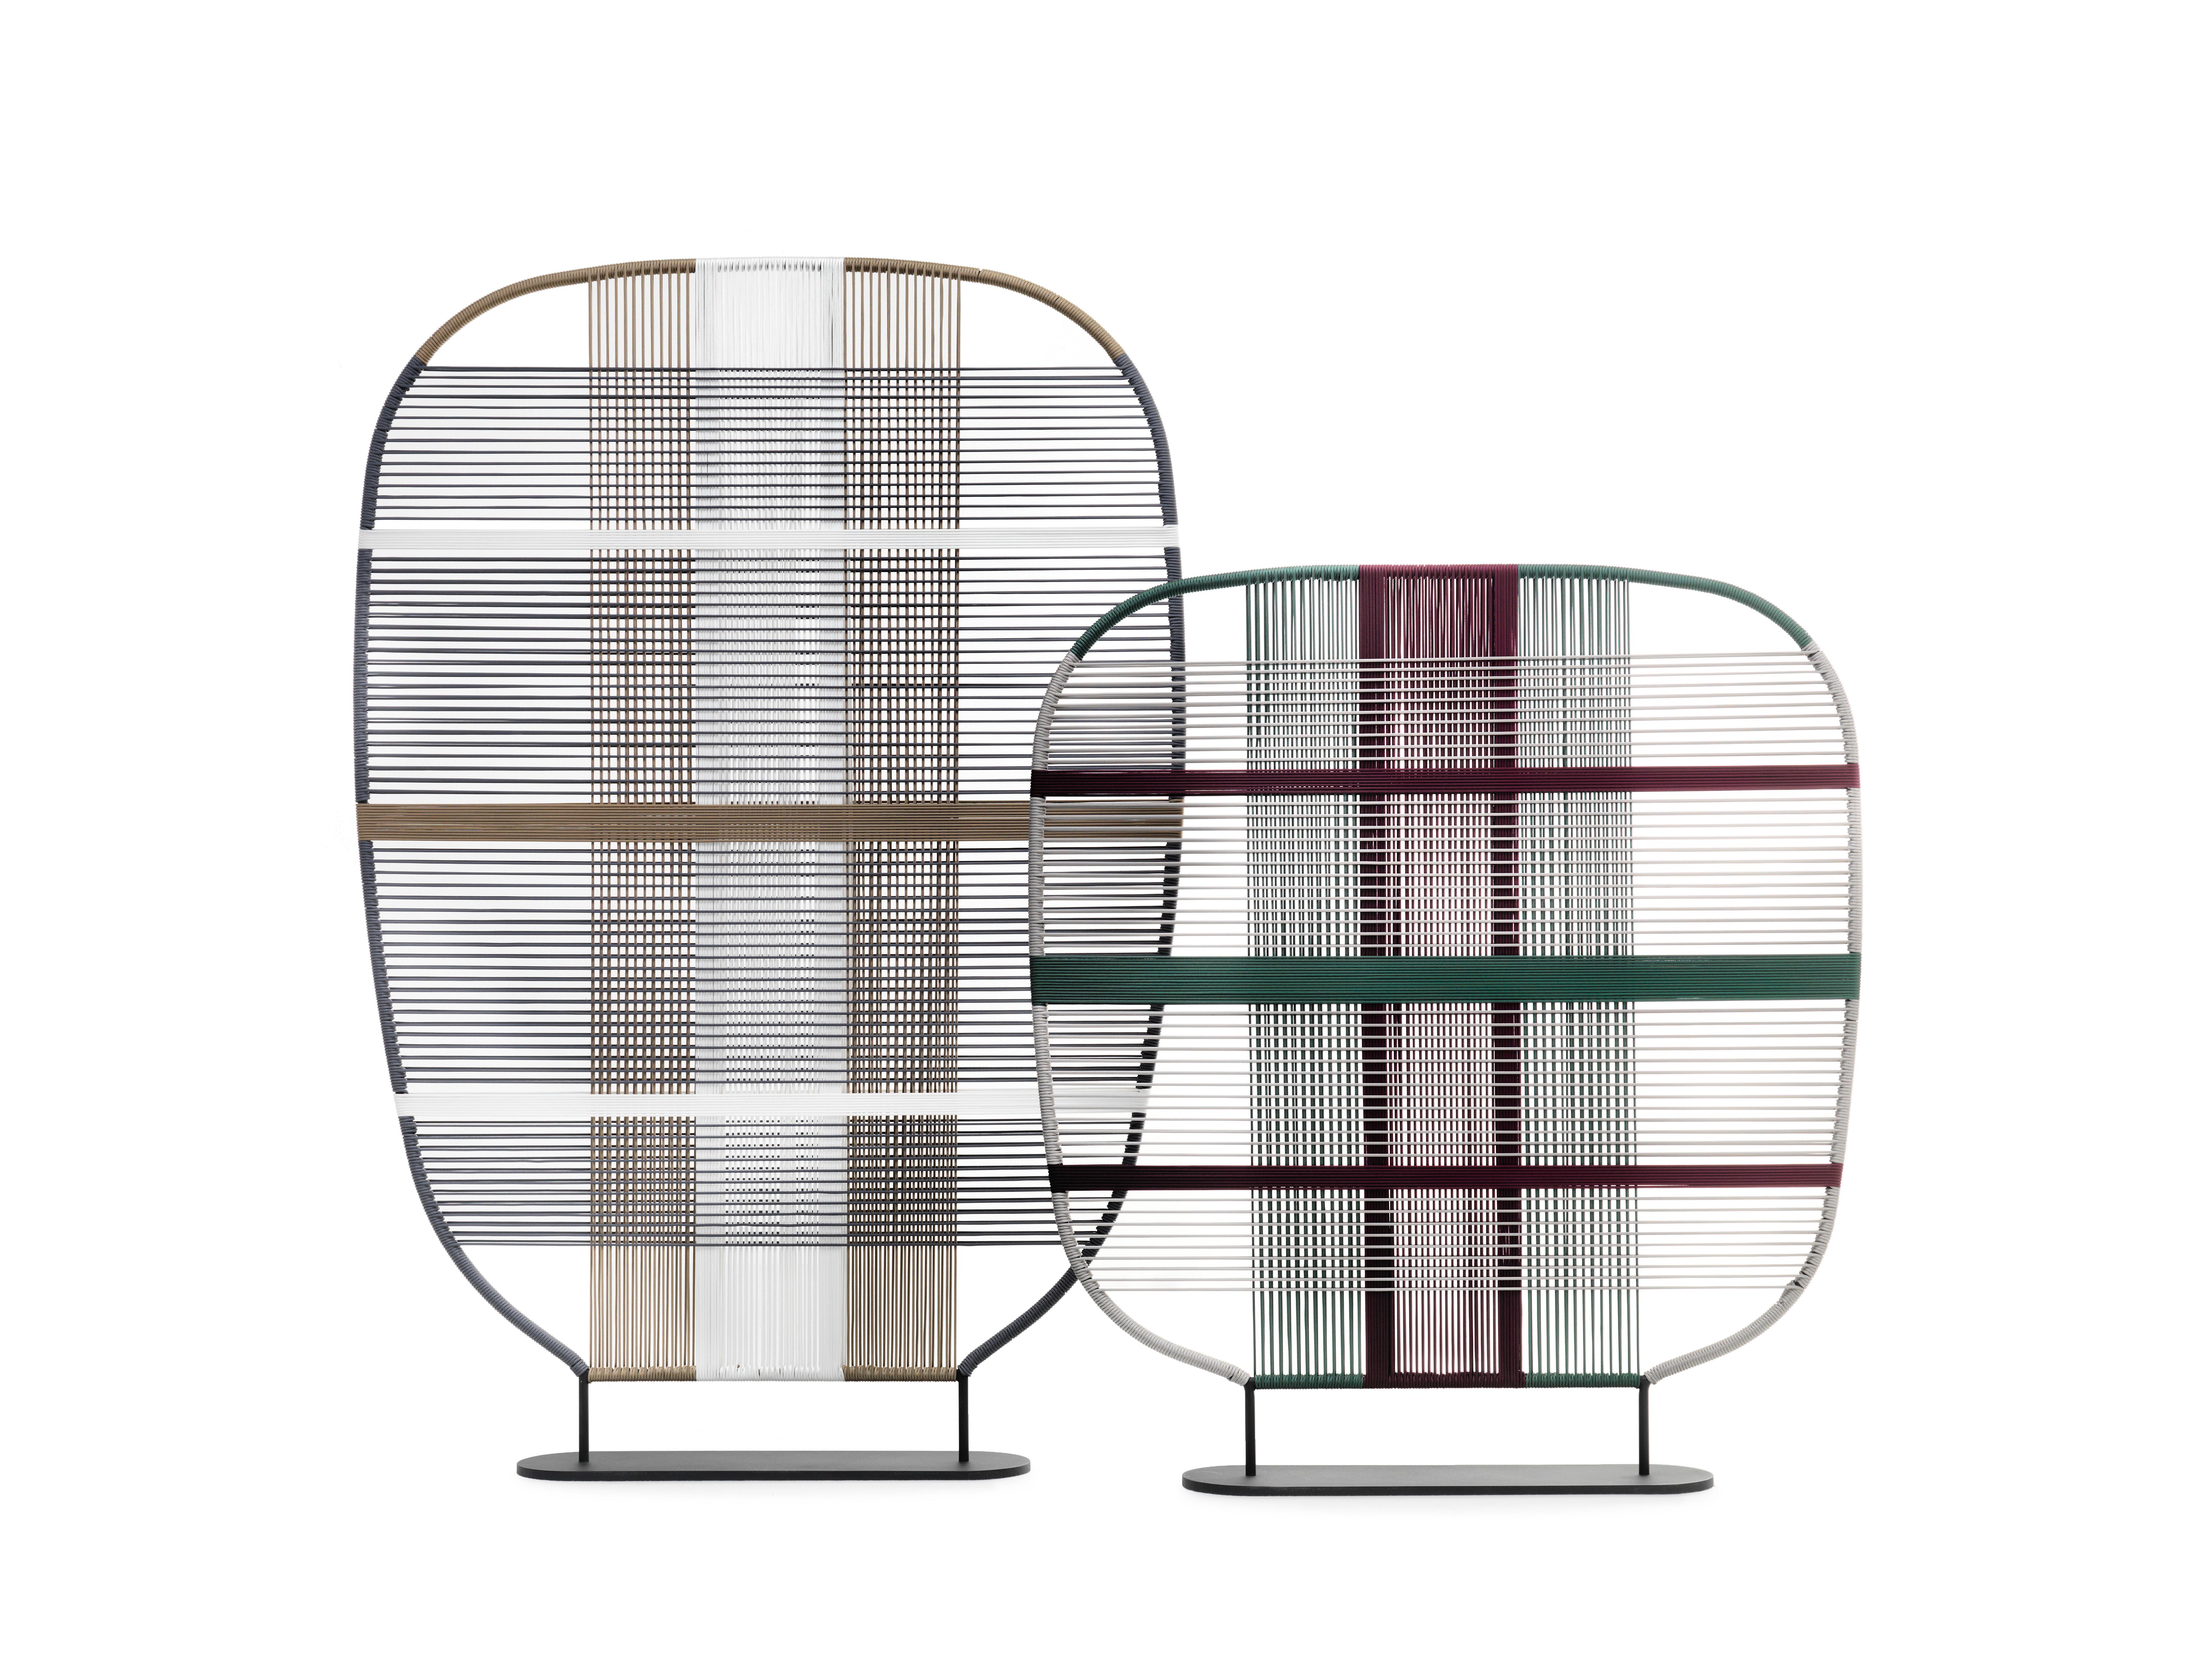 The Shade of Venice dividers are created with a magical colourful weave in nautical cords inspired by the Venetian islands and their local colours. Thus four collections emerge: Murano, Burano, Giudecca and Sant’Erasmo. From the white stone of